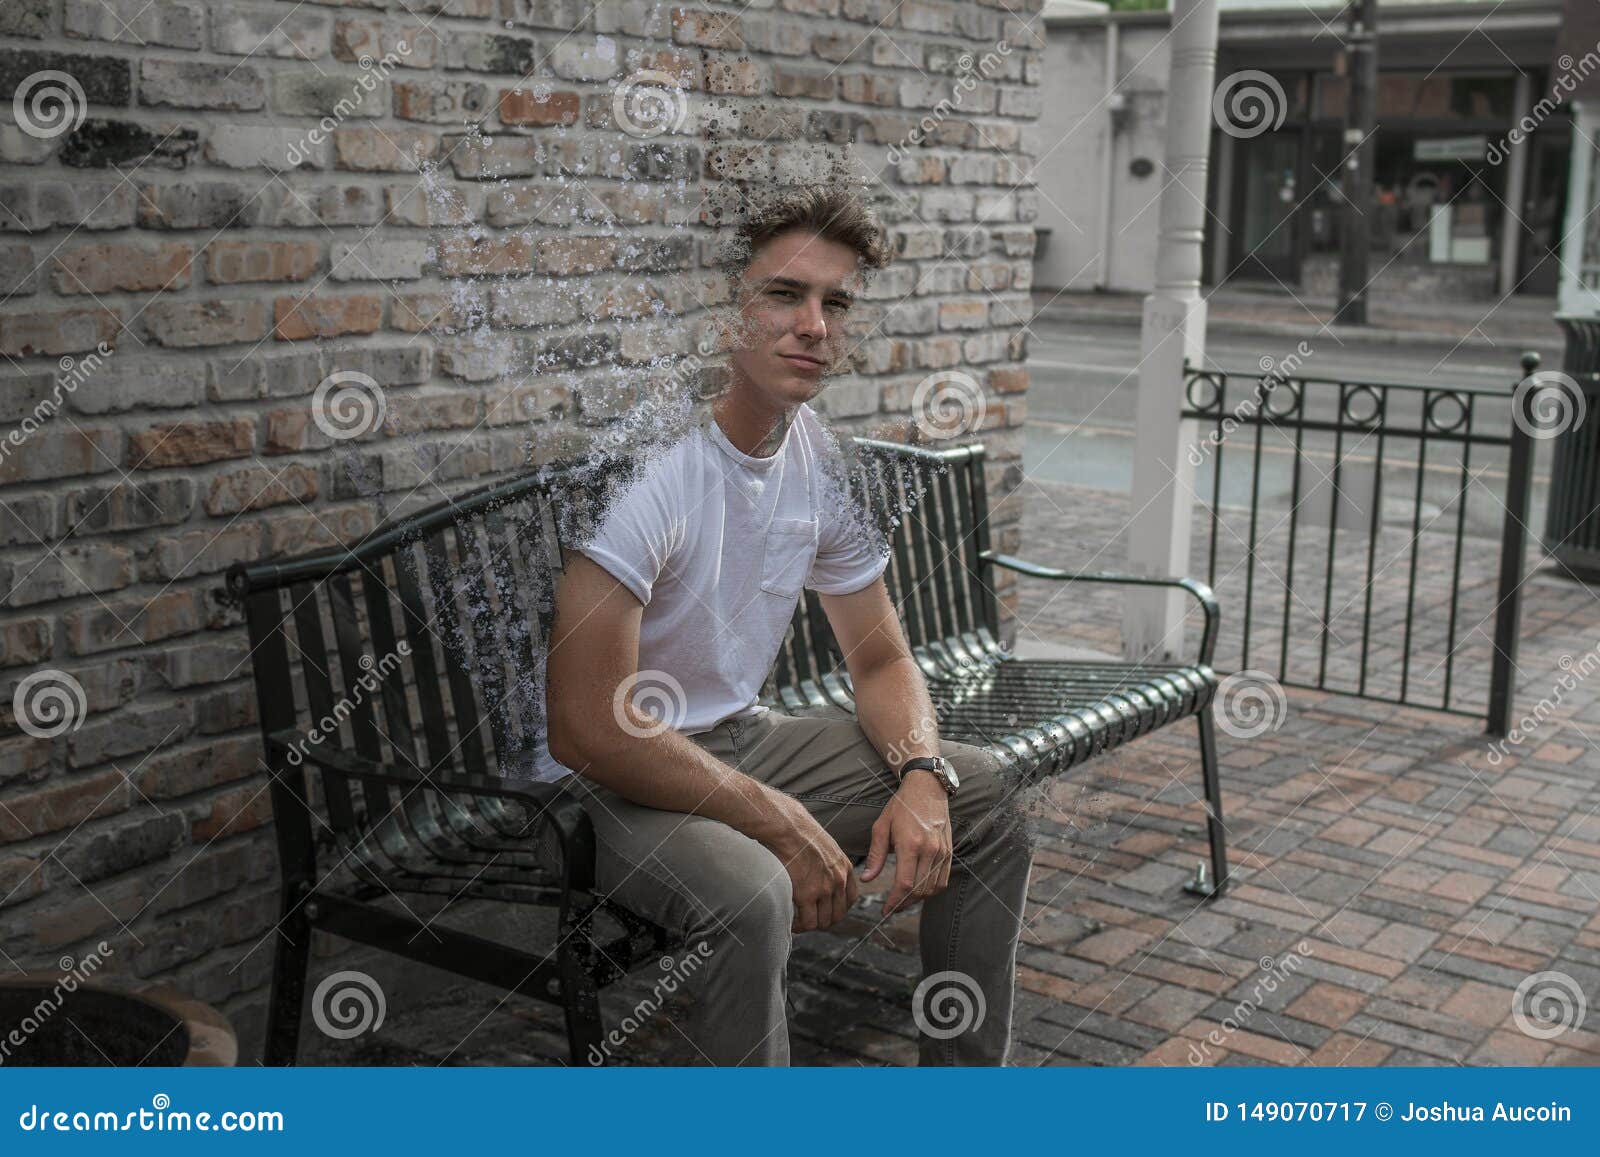 Fading Away into Nothing in the City Stock Image - Image of effect ...